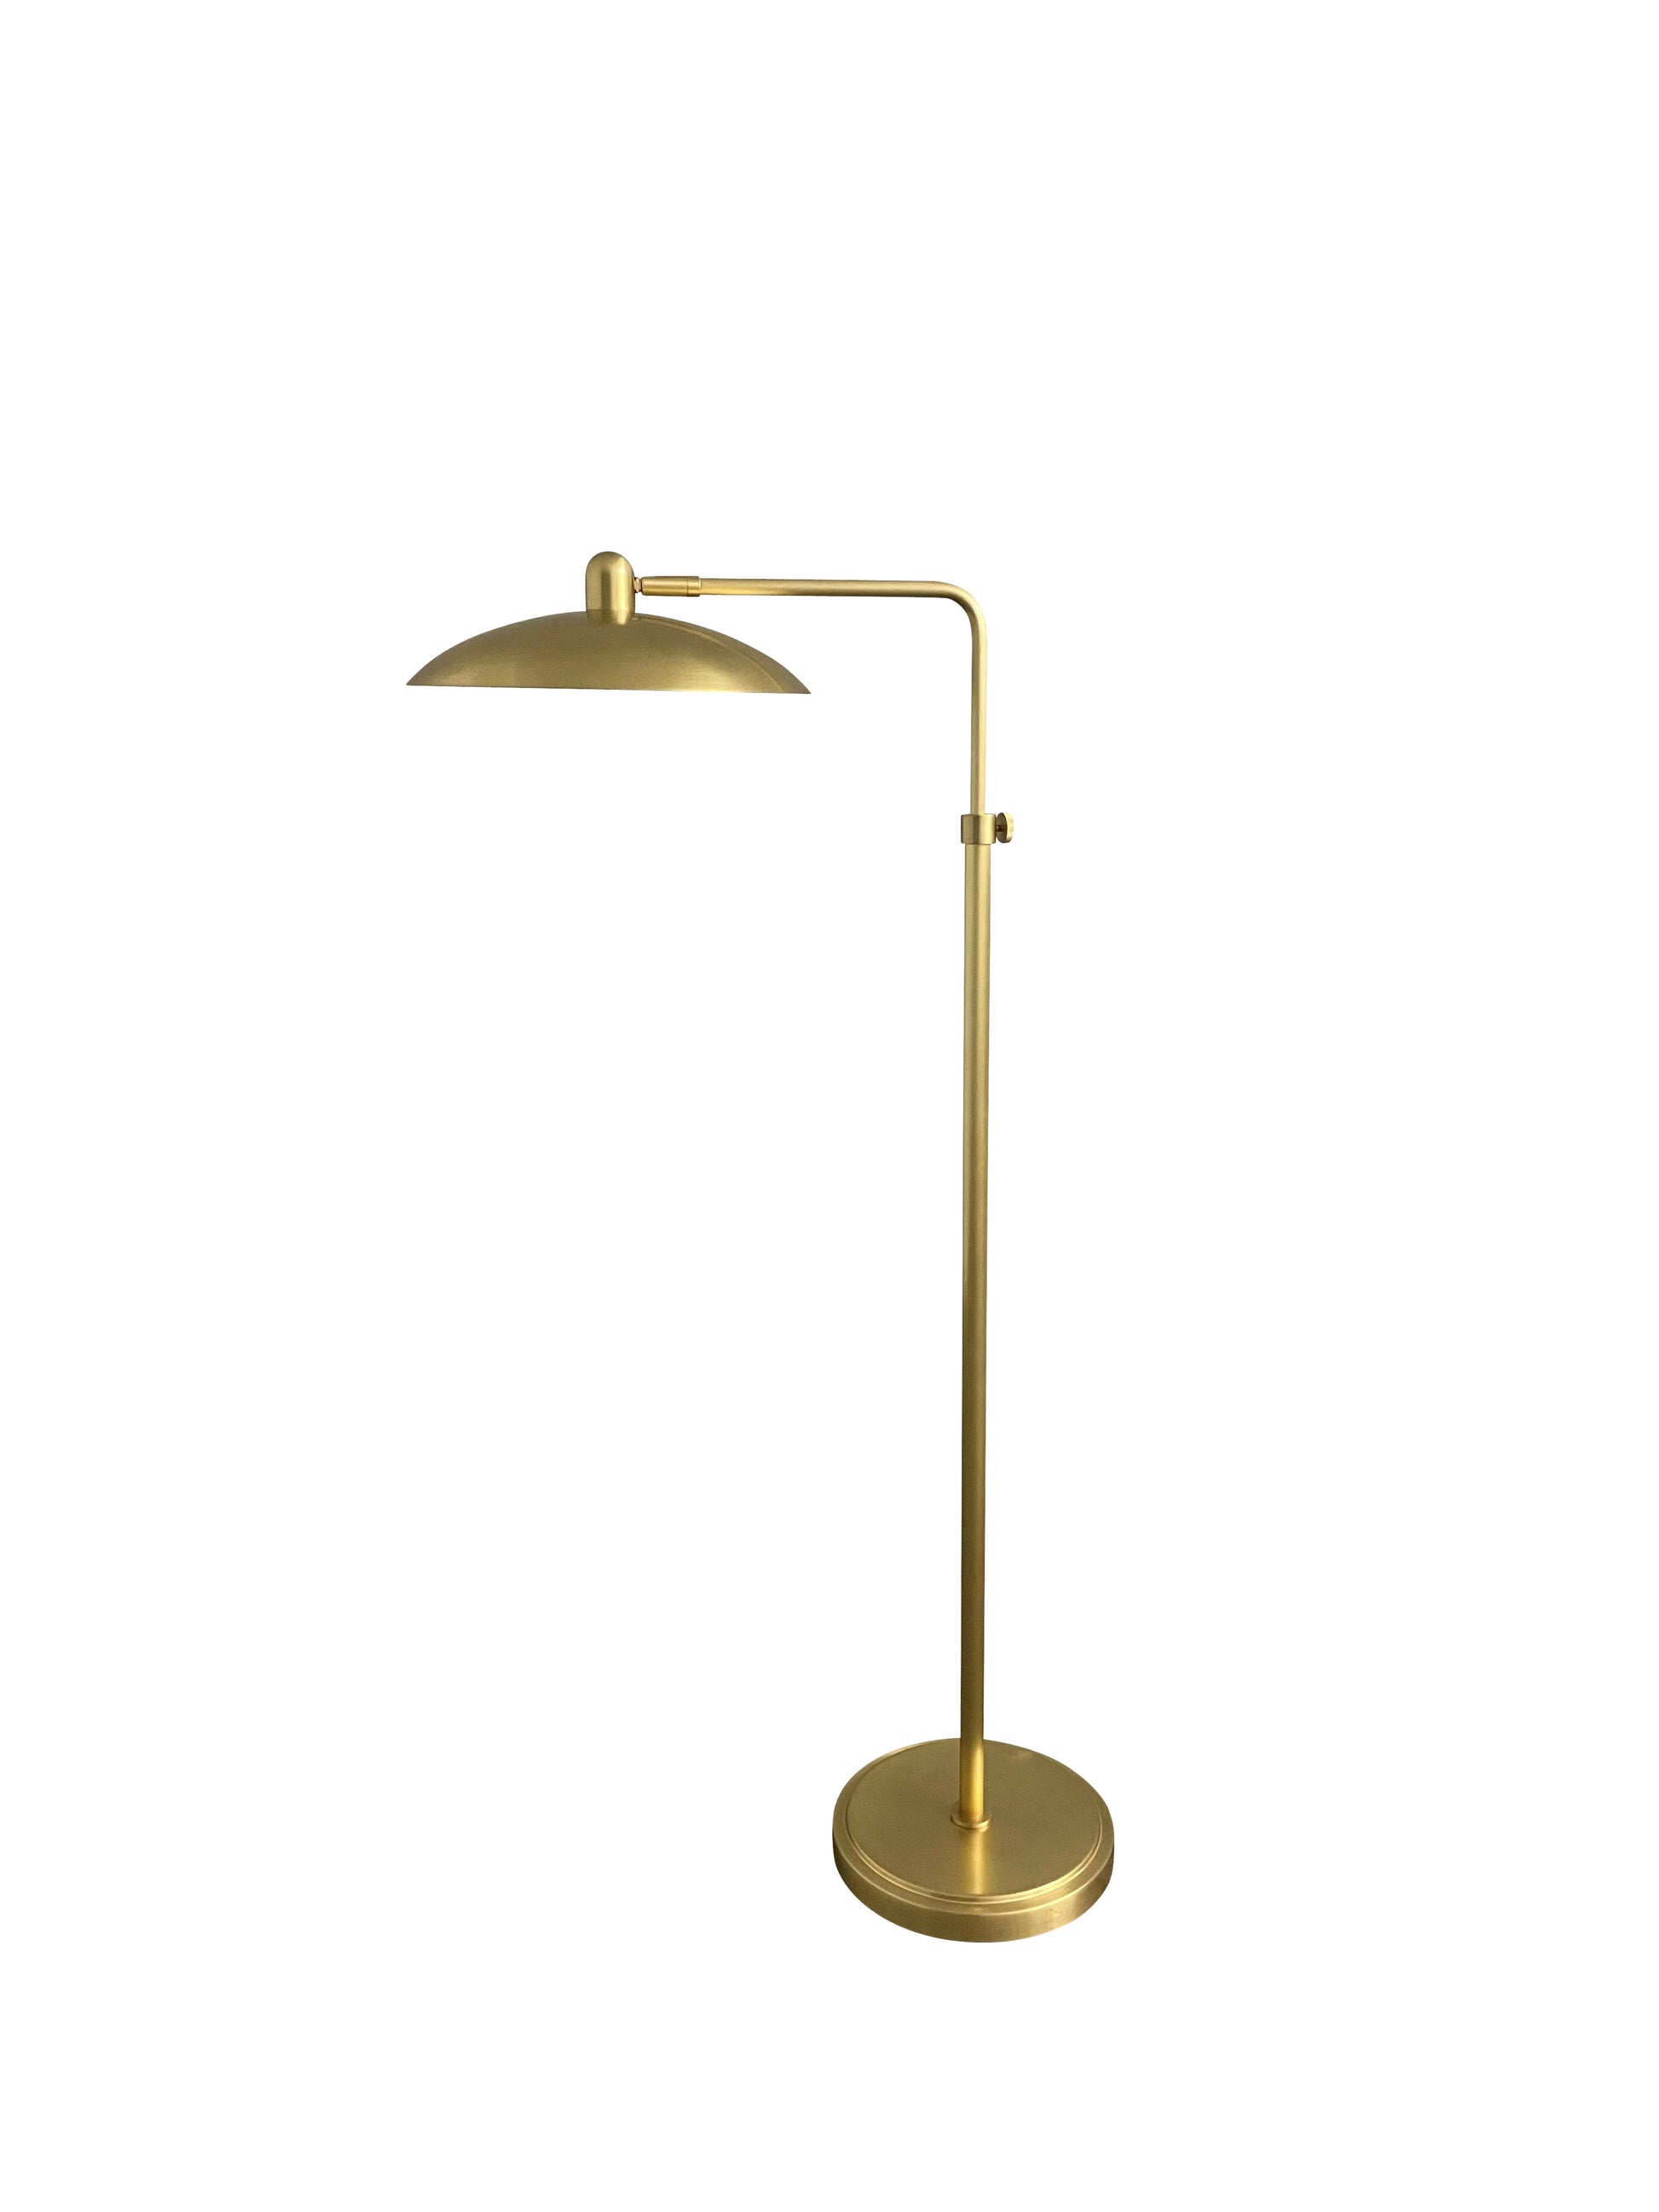 House of Troy Ridgeline natural brass adjustable floor lamp with metal dome shaped shade RL200-NTB